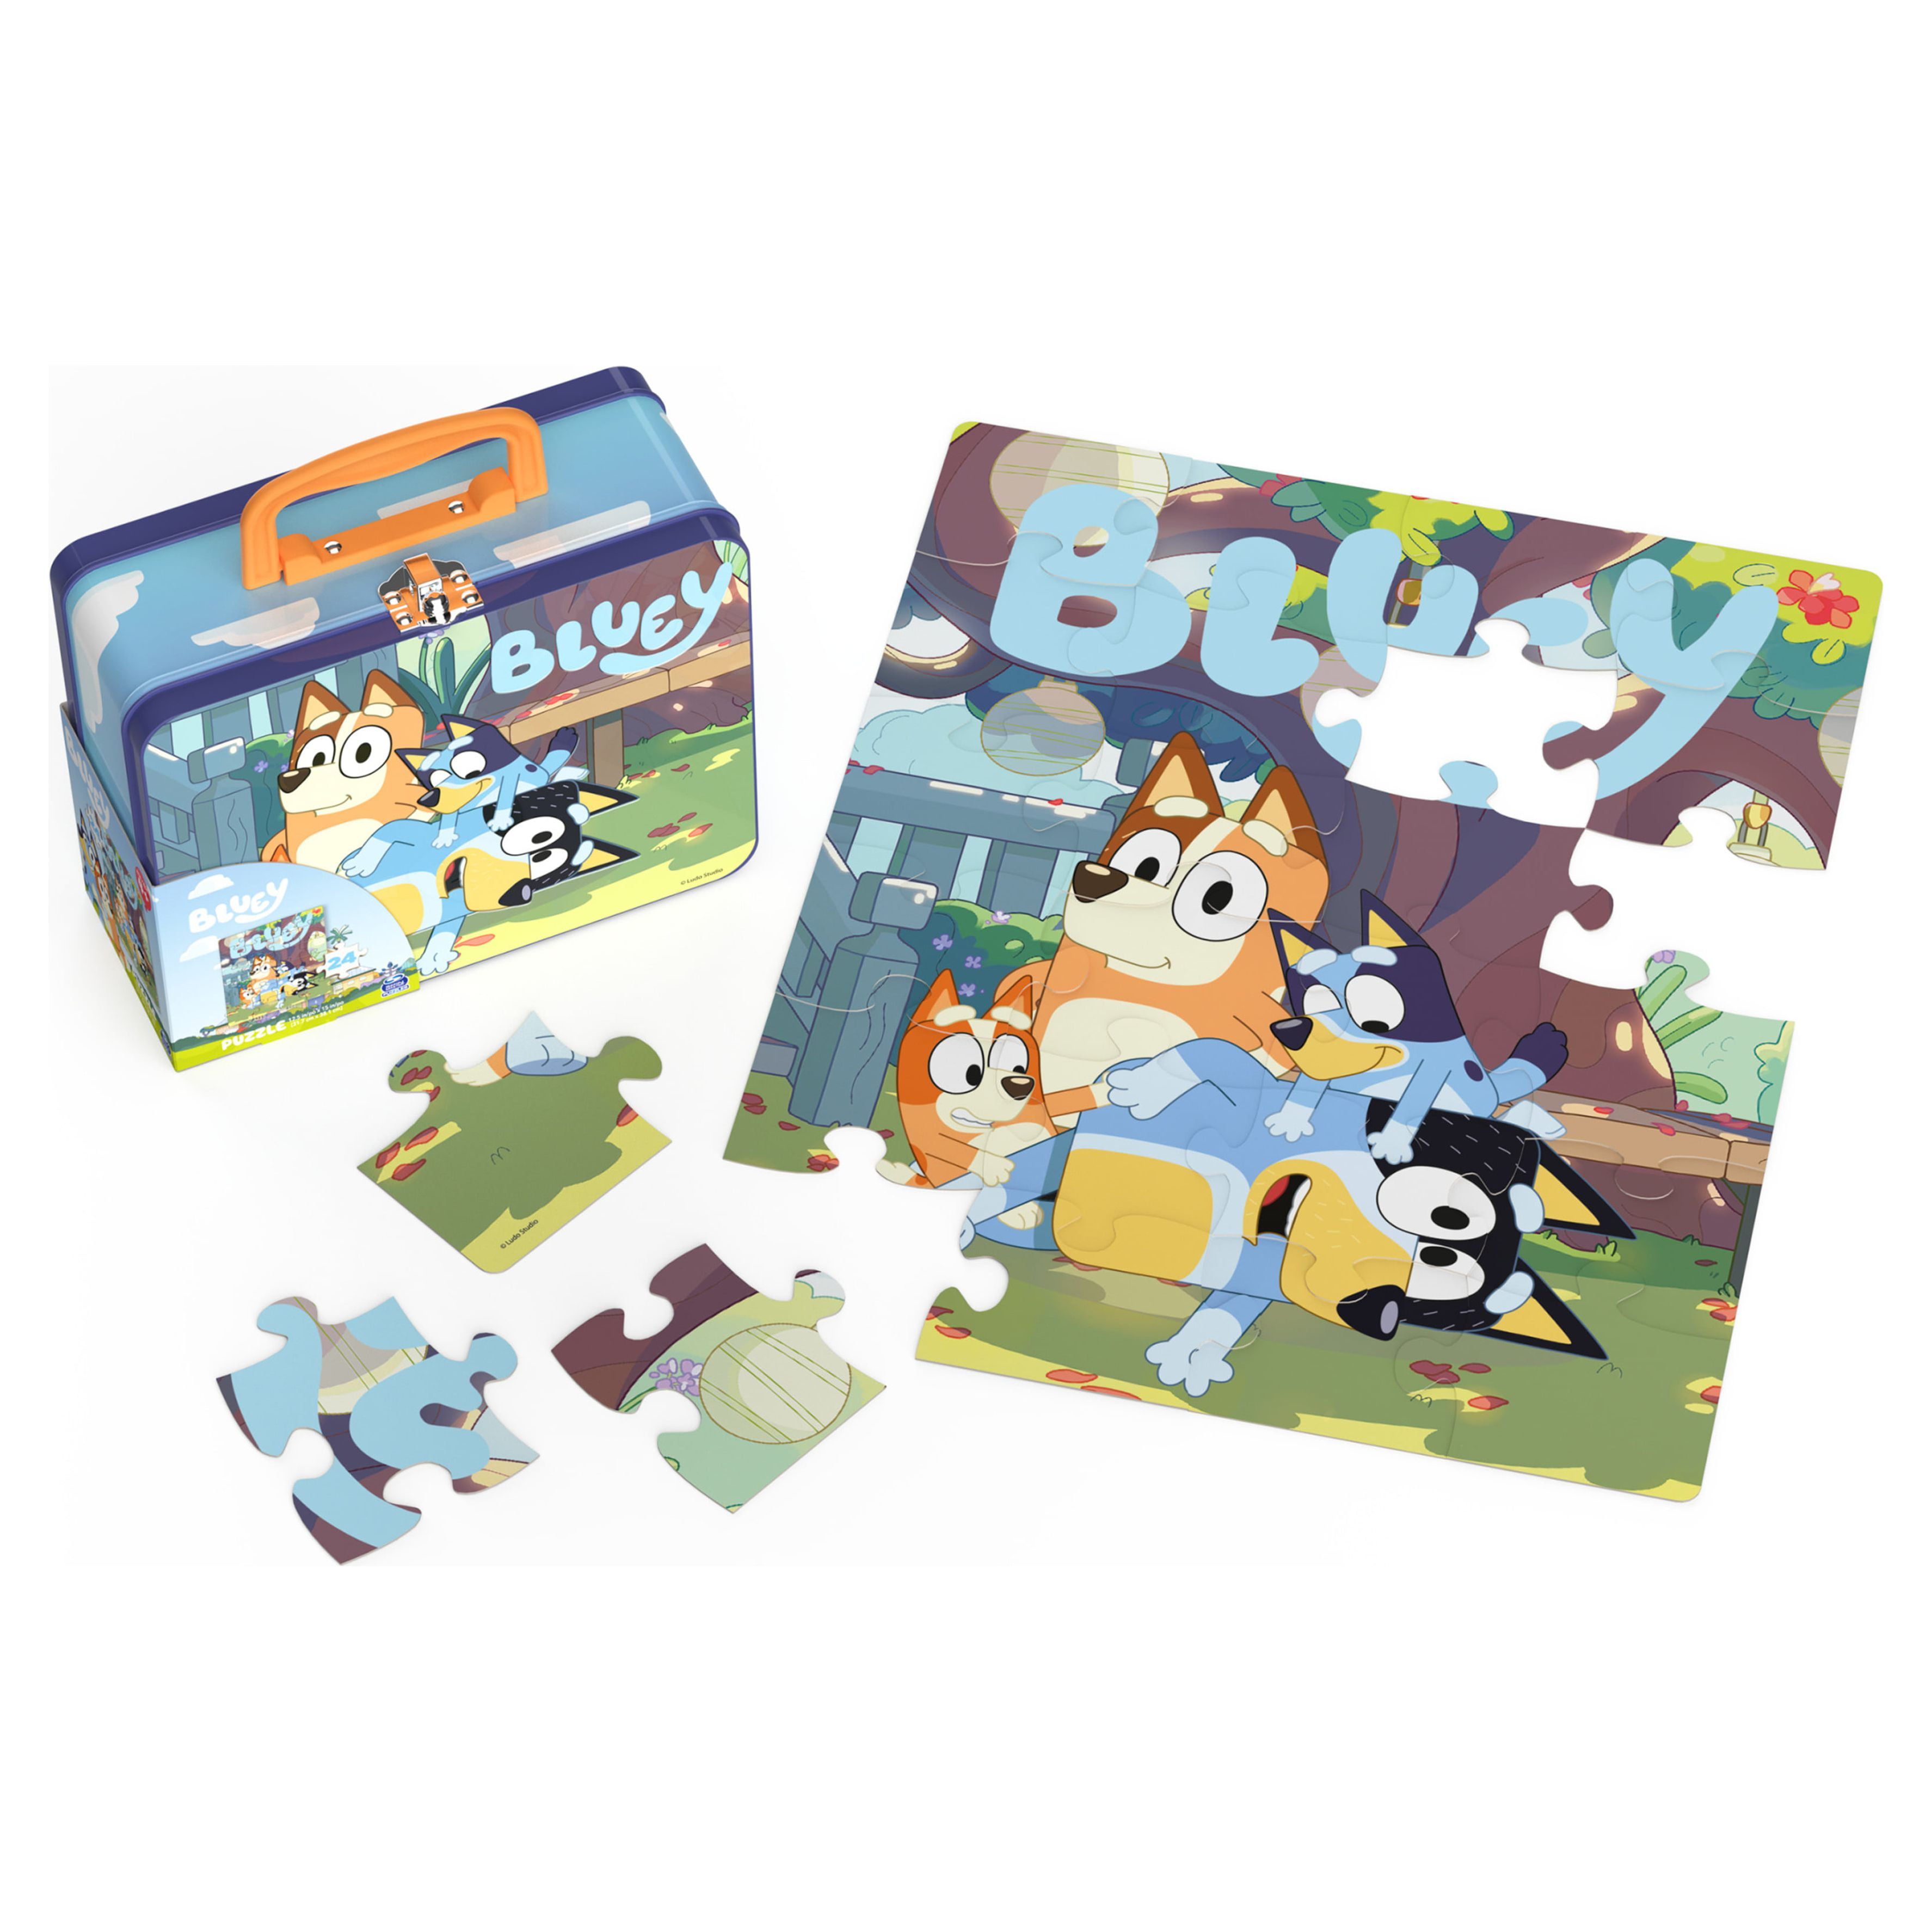  Bluey Lunch Tin Puzzle 24pc : Toys & Games